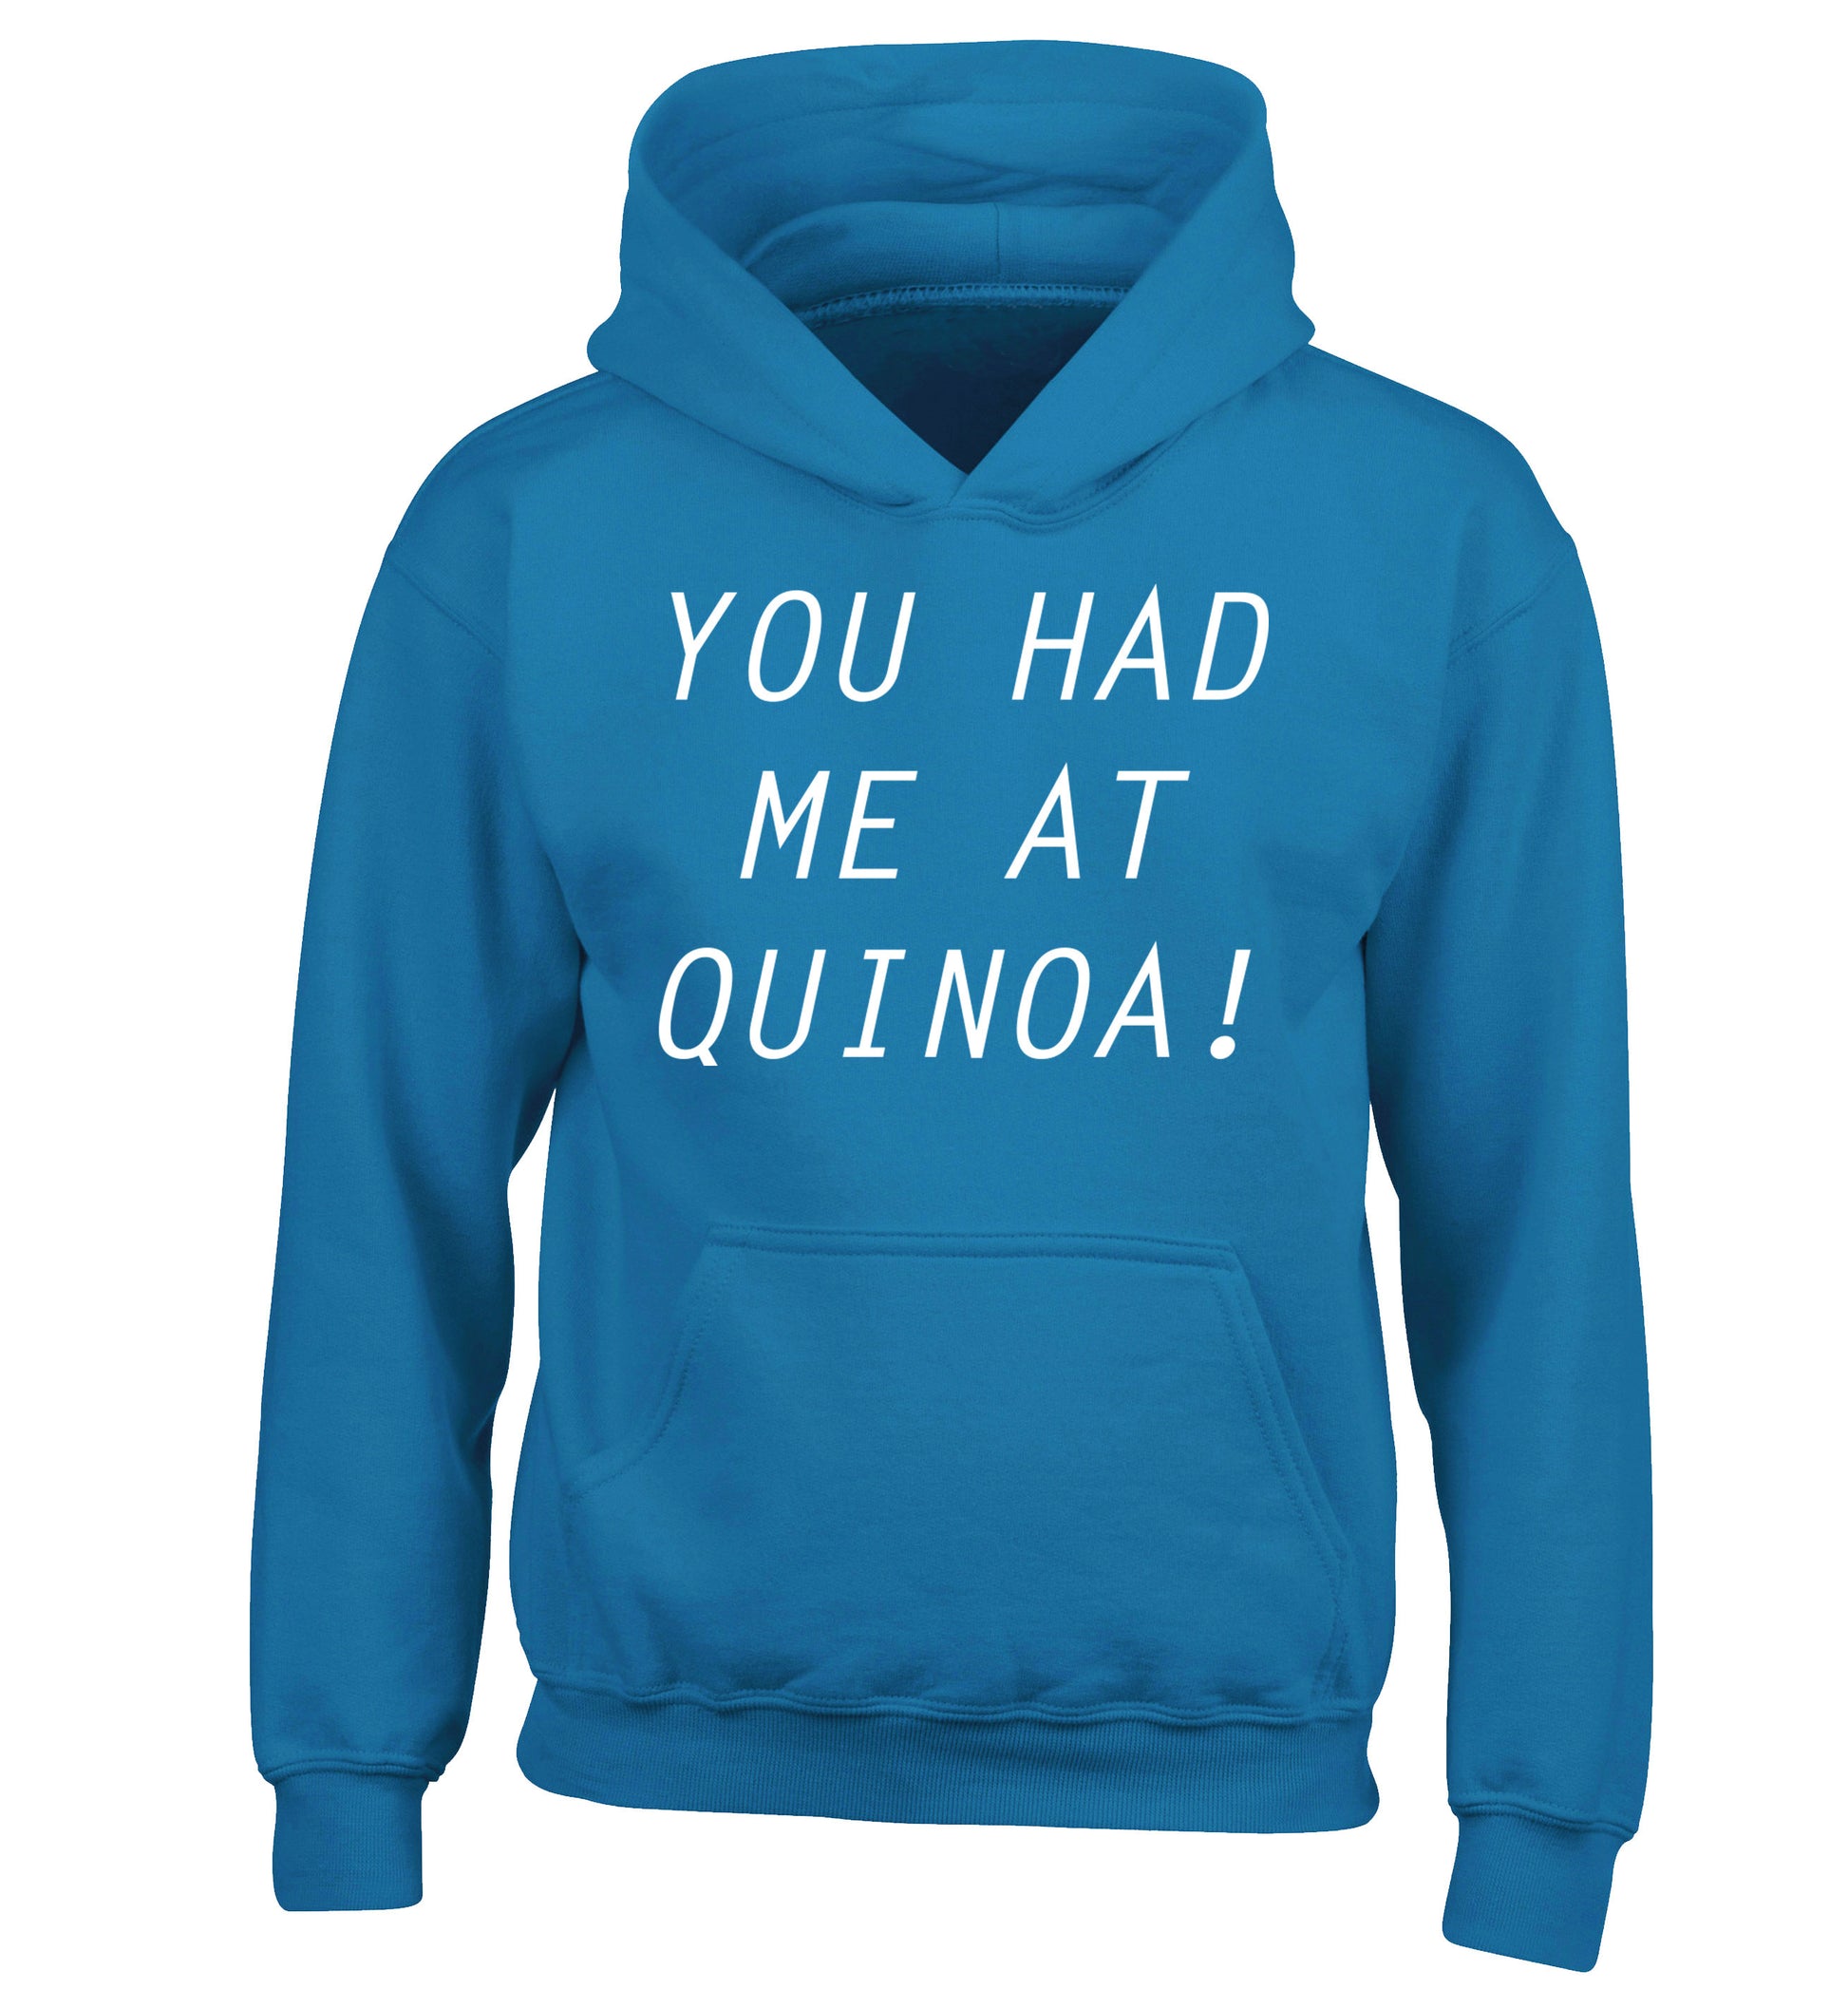 You had me at quinoa children's blue hoodie 12-14 Years